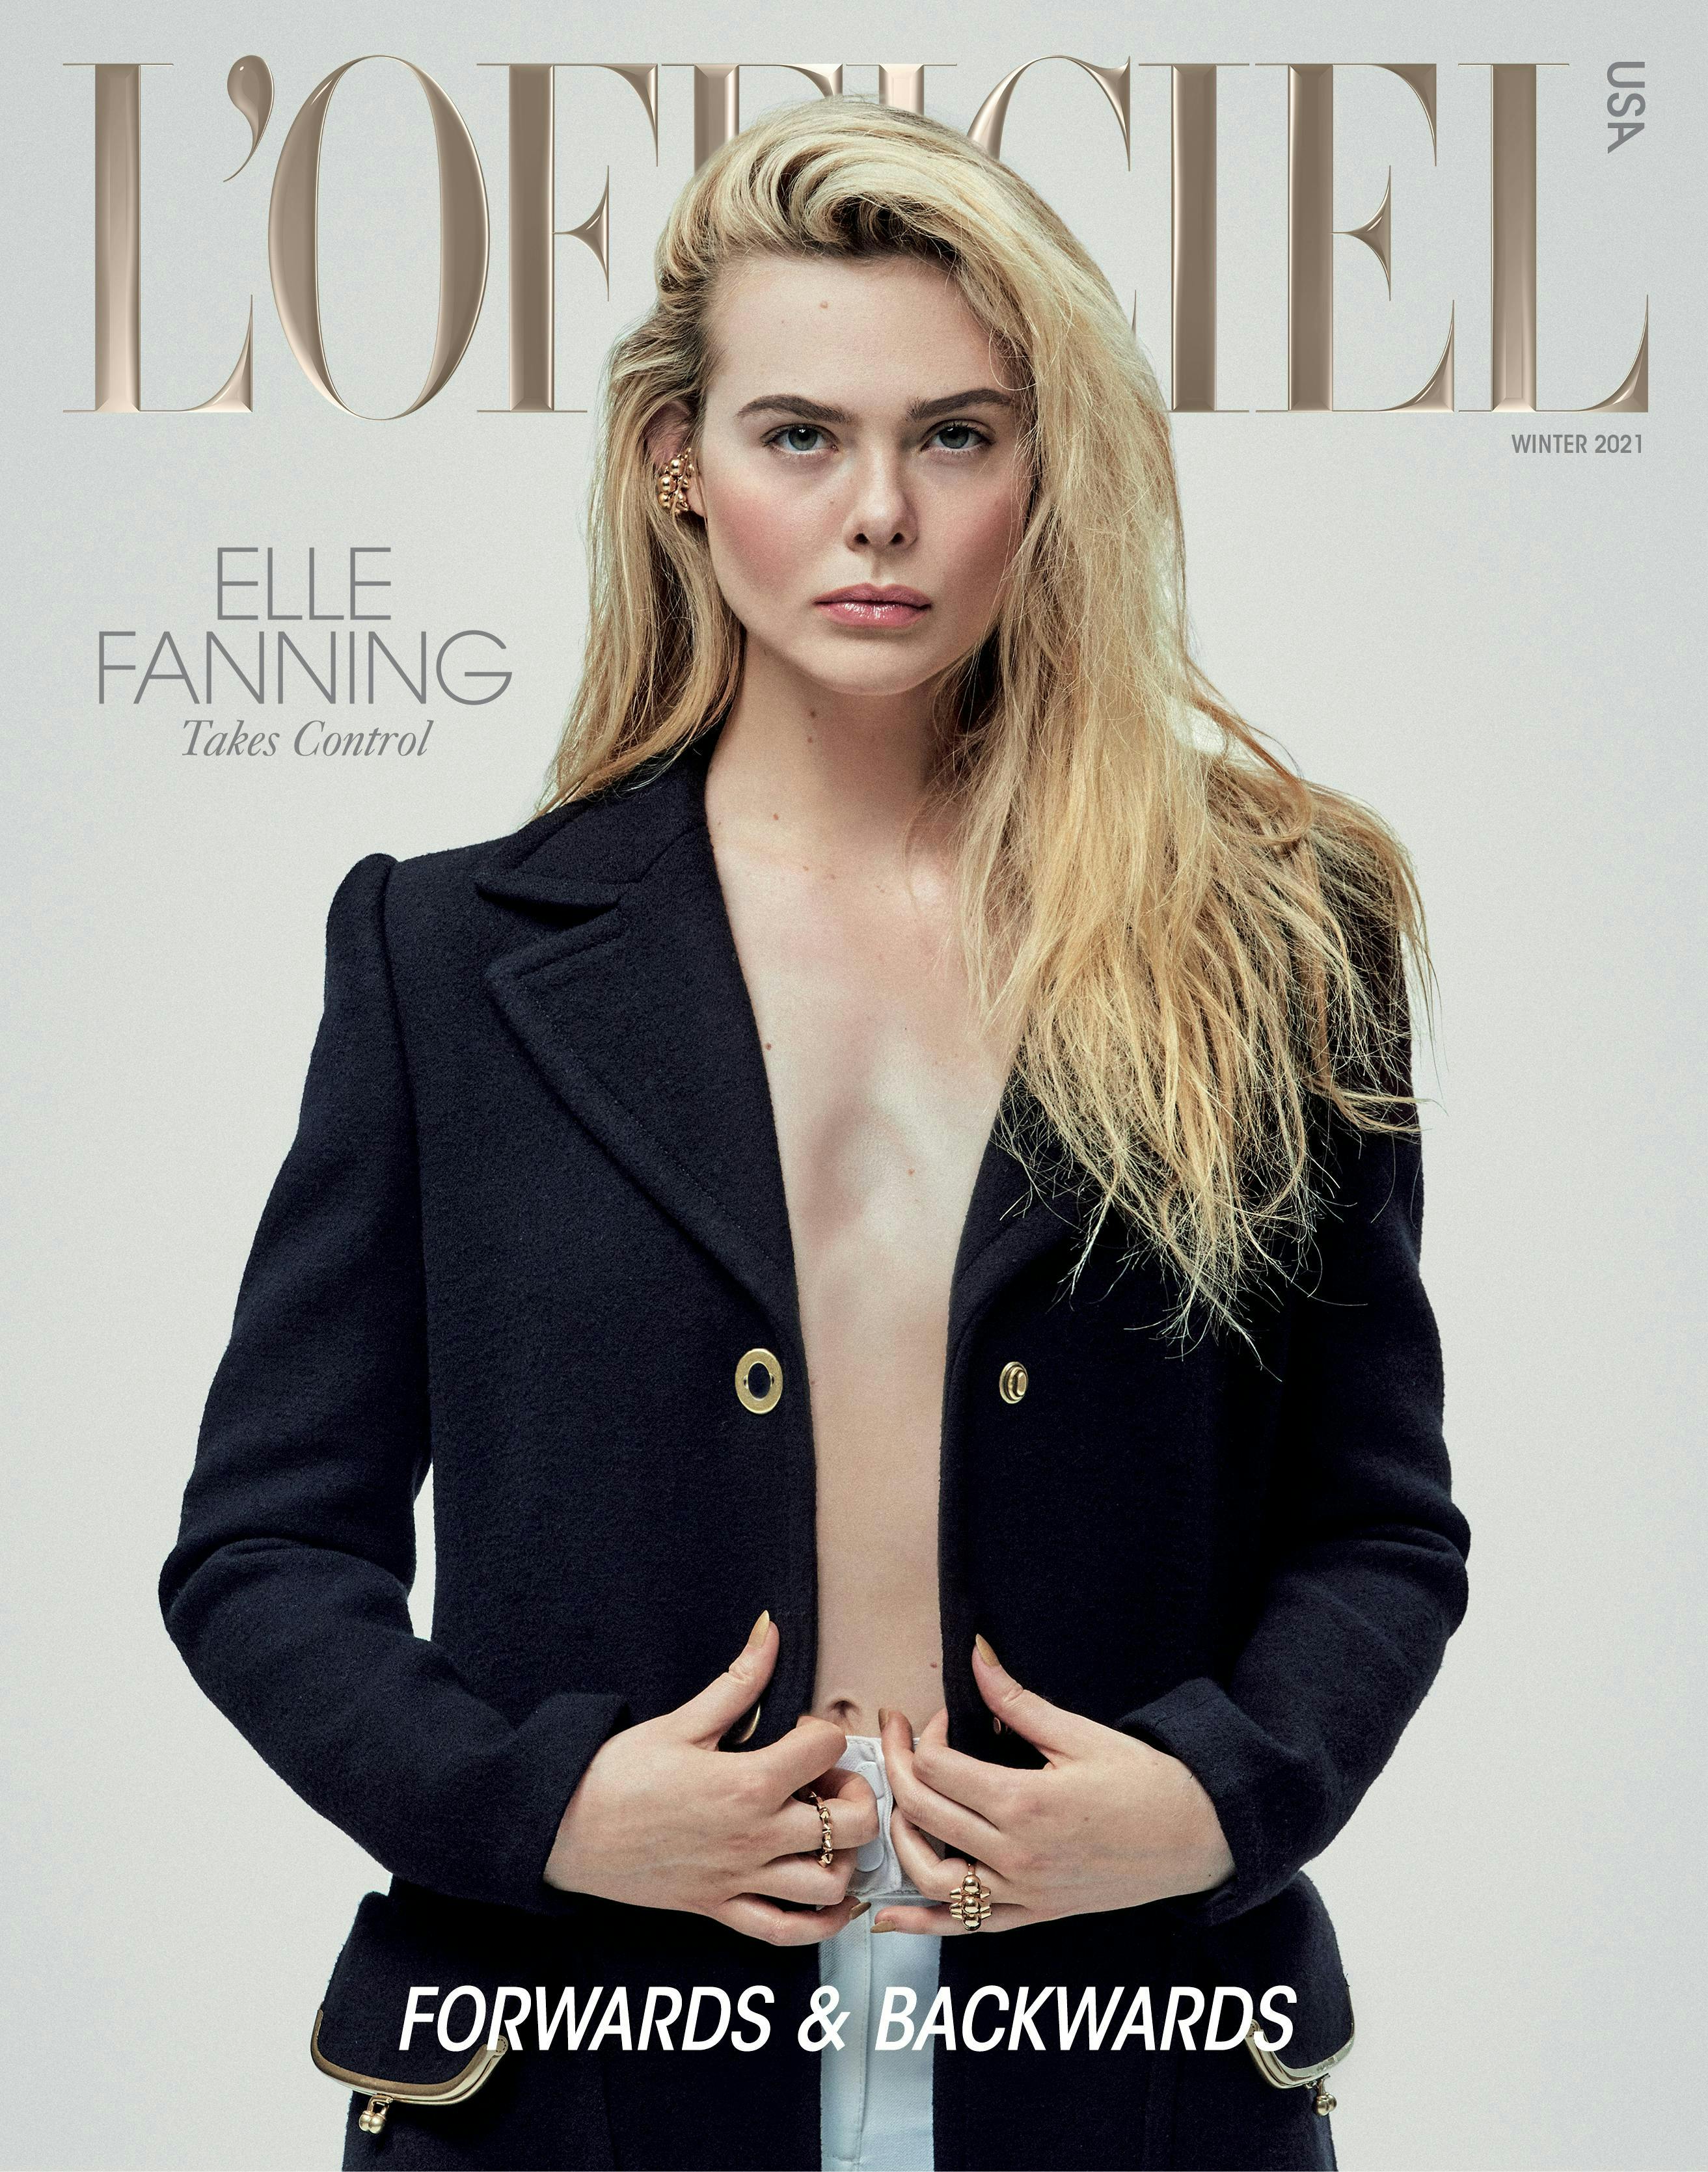 L'OFFICIEL USA Winter 2021 Issue with Elle Fanning